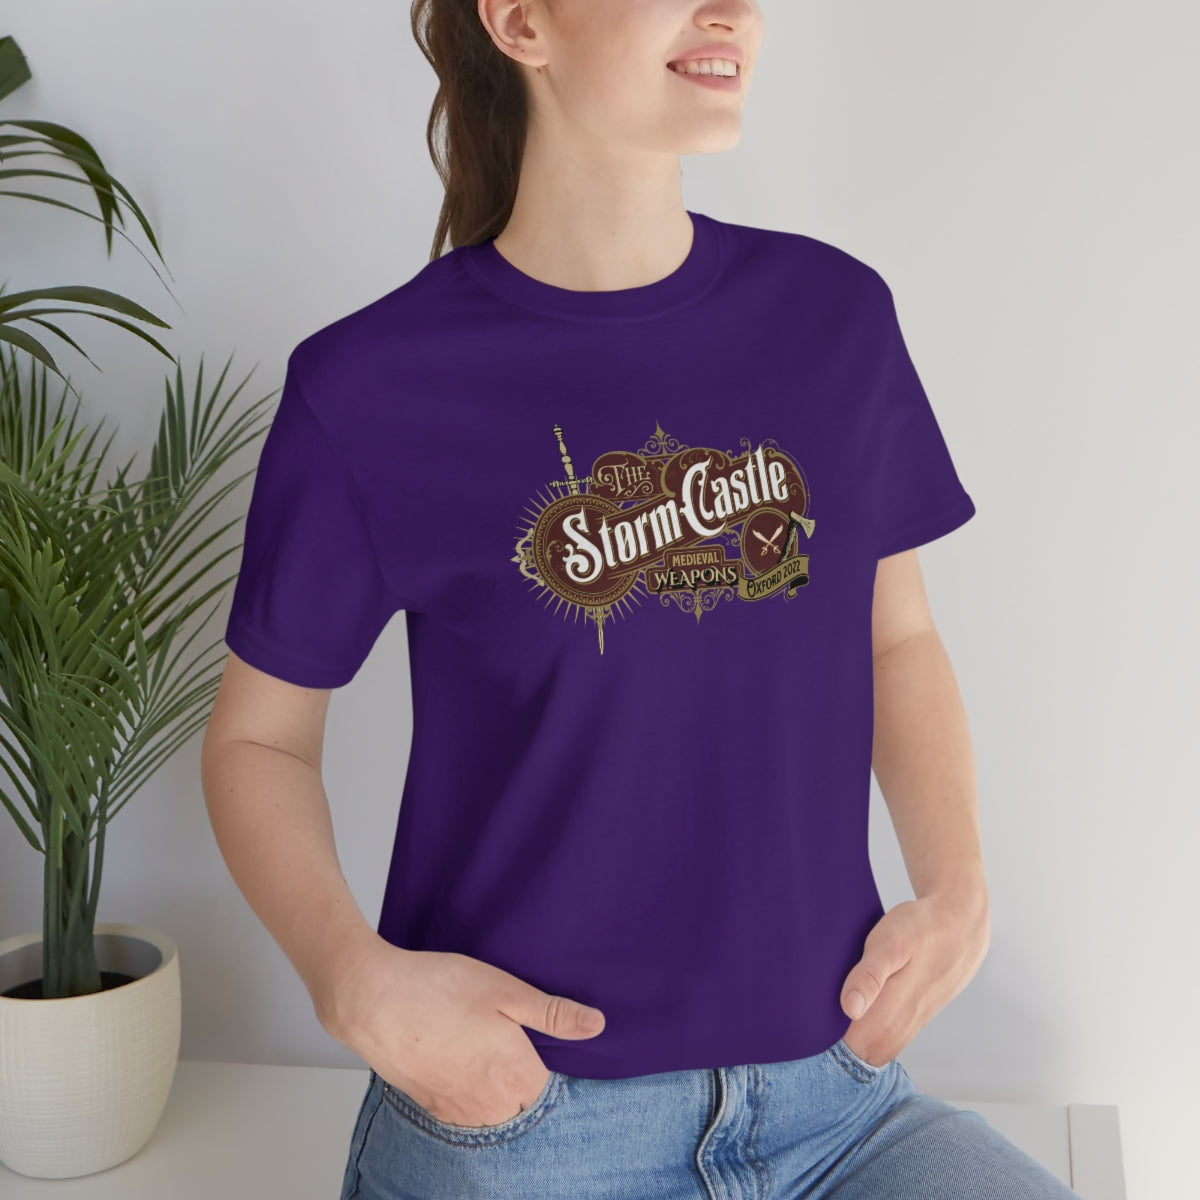 Storm Castle Medieval Weapons - Unisex Jersey Short Sleeve Tee